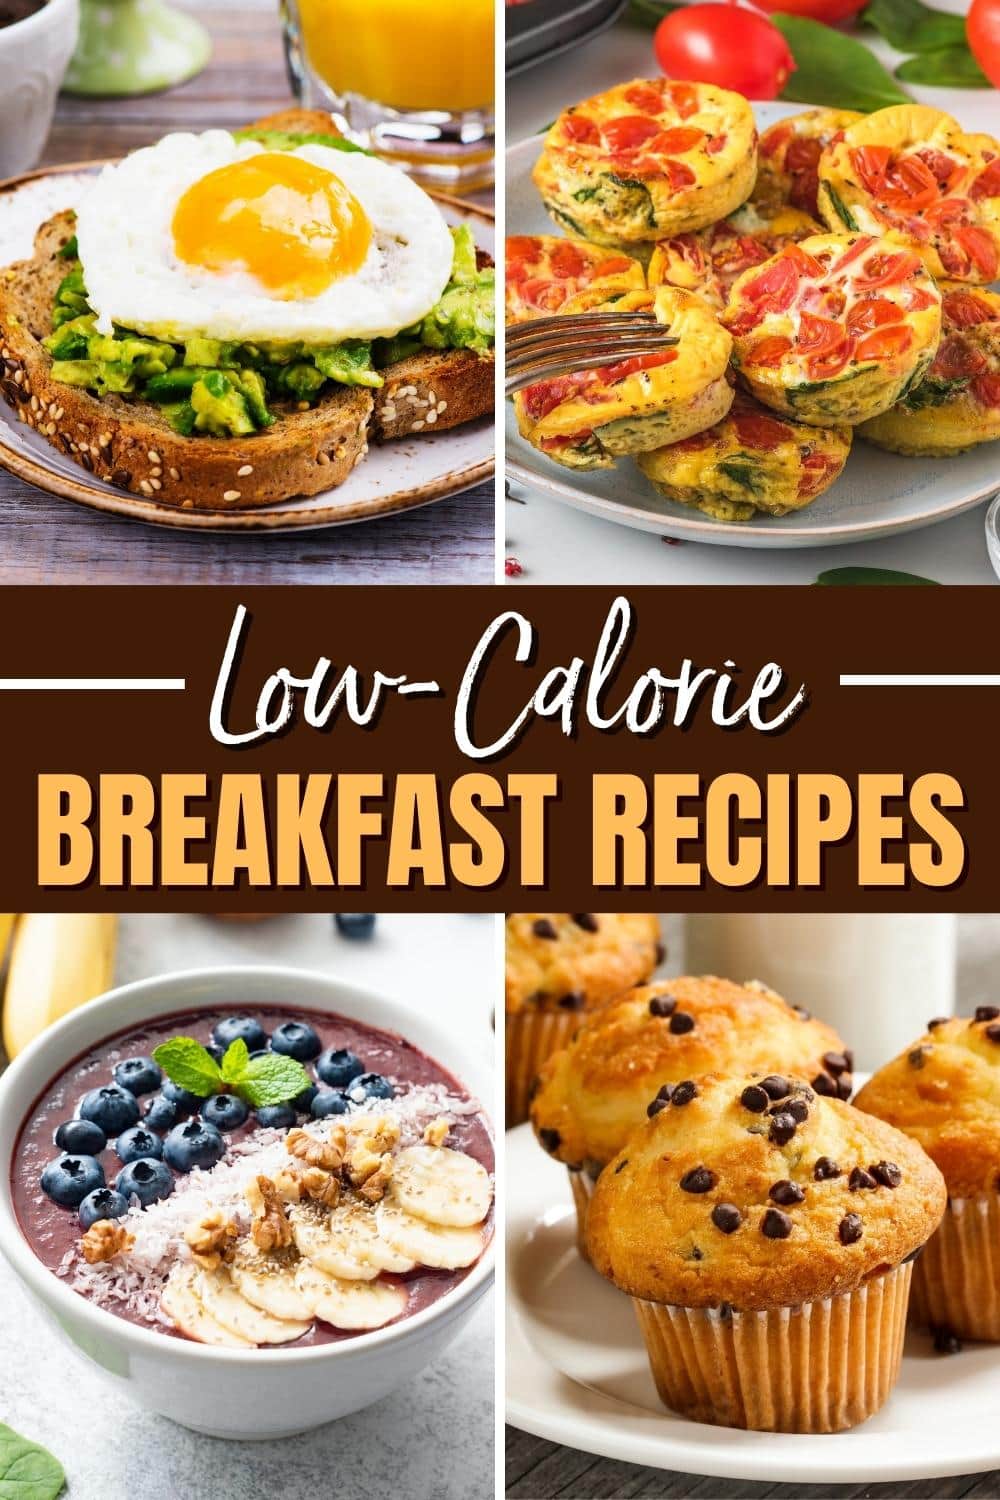 35 Low-Calorie Breakfast Recipes for Weight Loss - Insanely Good